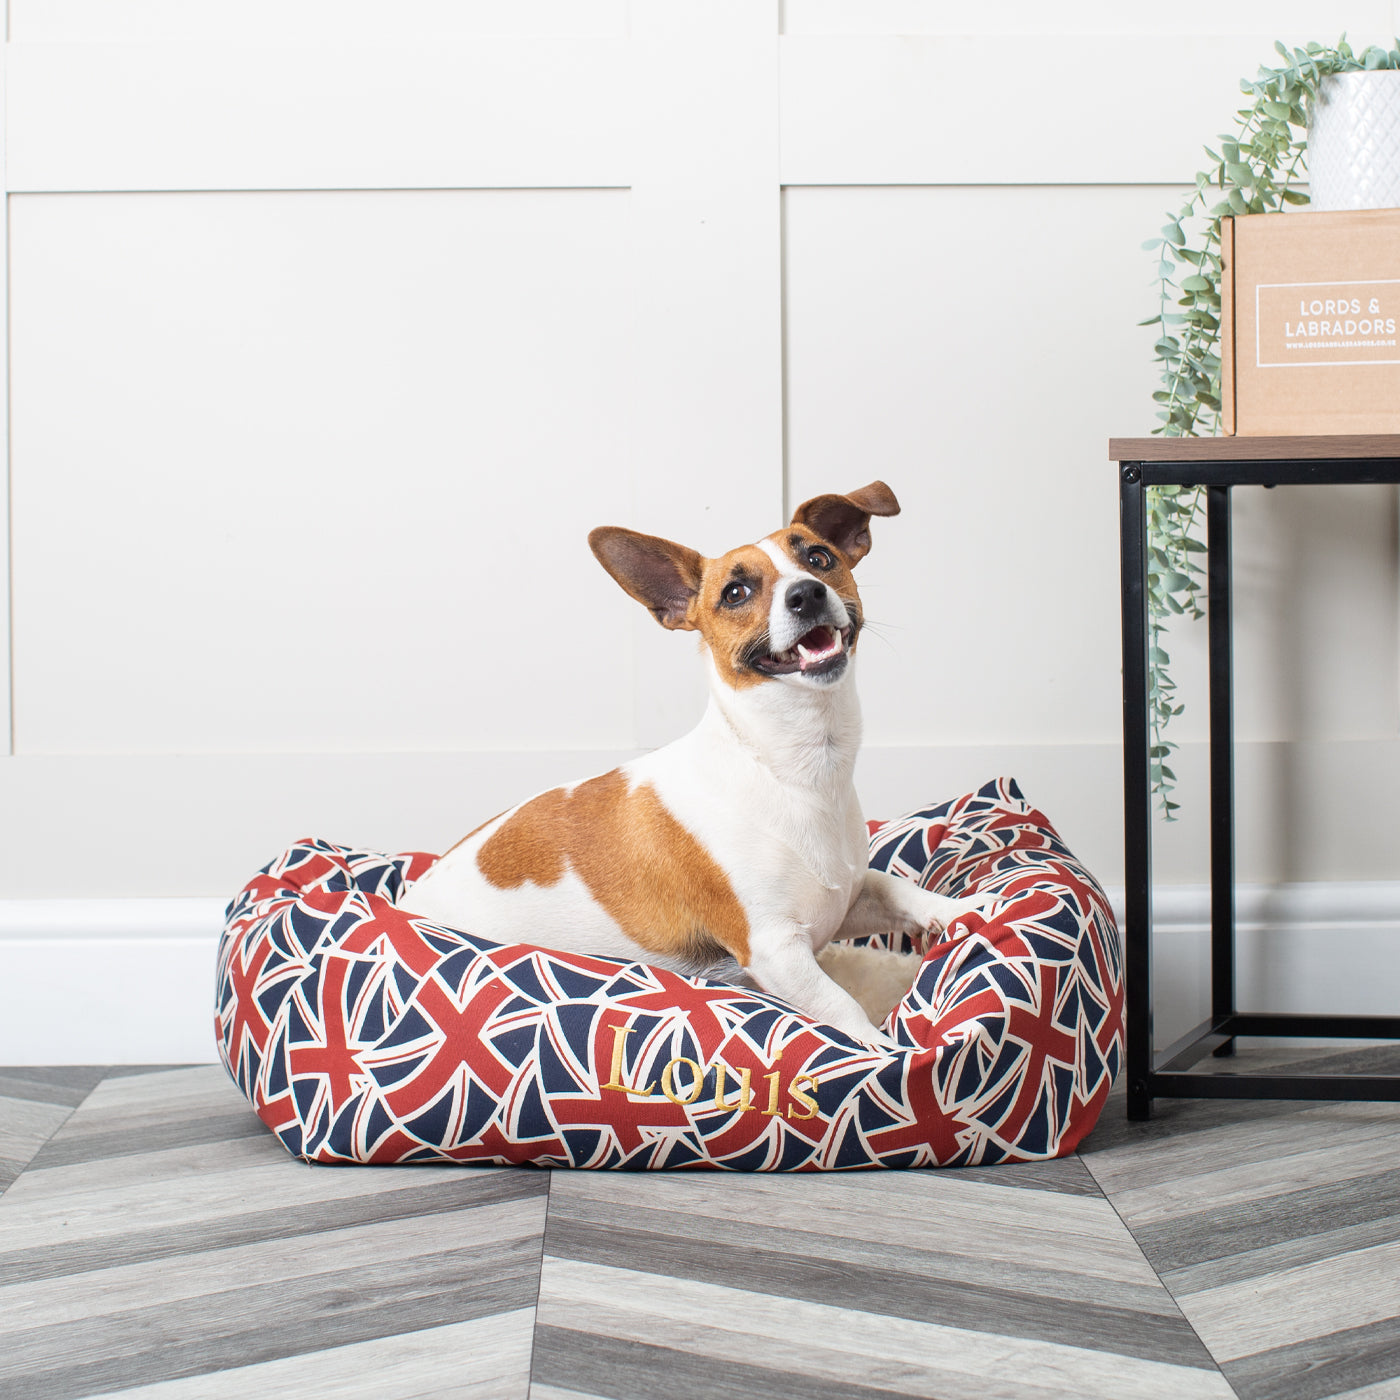 Cozy & Calming Puppy Cage Bed, The Perfect Dog Cage Accessory For The Ultimate Dog Den! In Stunning Union Jack! Now Available to Personalize at Lords & Labradors US